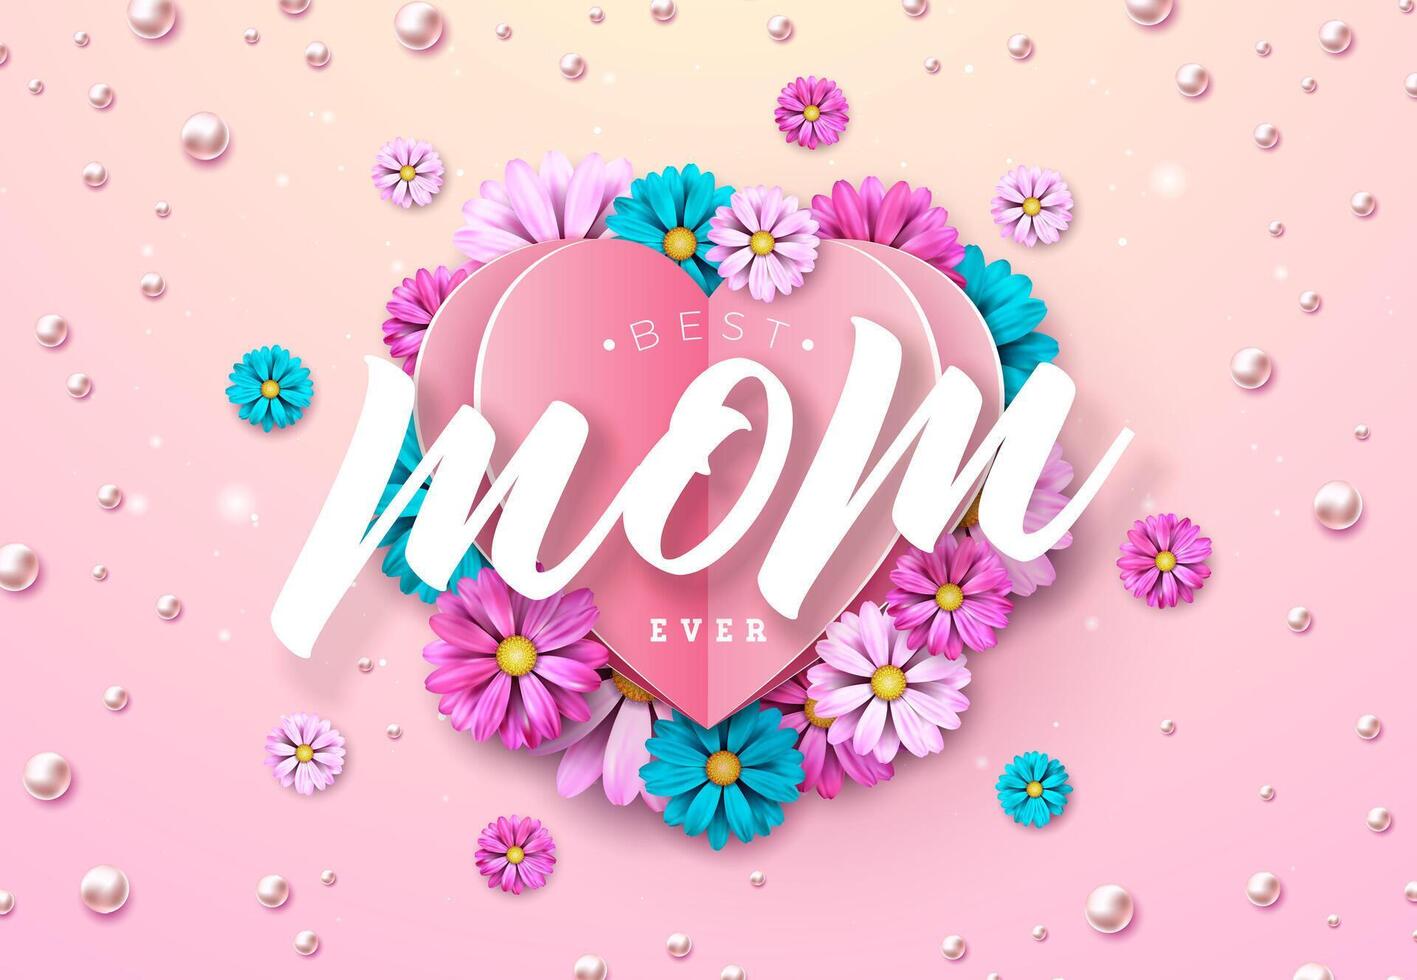 Happy Mother's Day Banner or Postcard with Paper Hearts and Colorful Spring Flower on Pink Background. Vector Mom Celebration Design with Symbol of Love for Greeting Card, Flyer, Invitation, Brochure